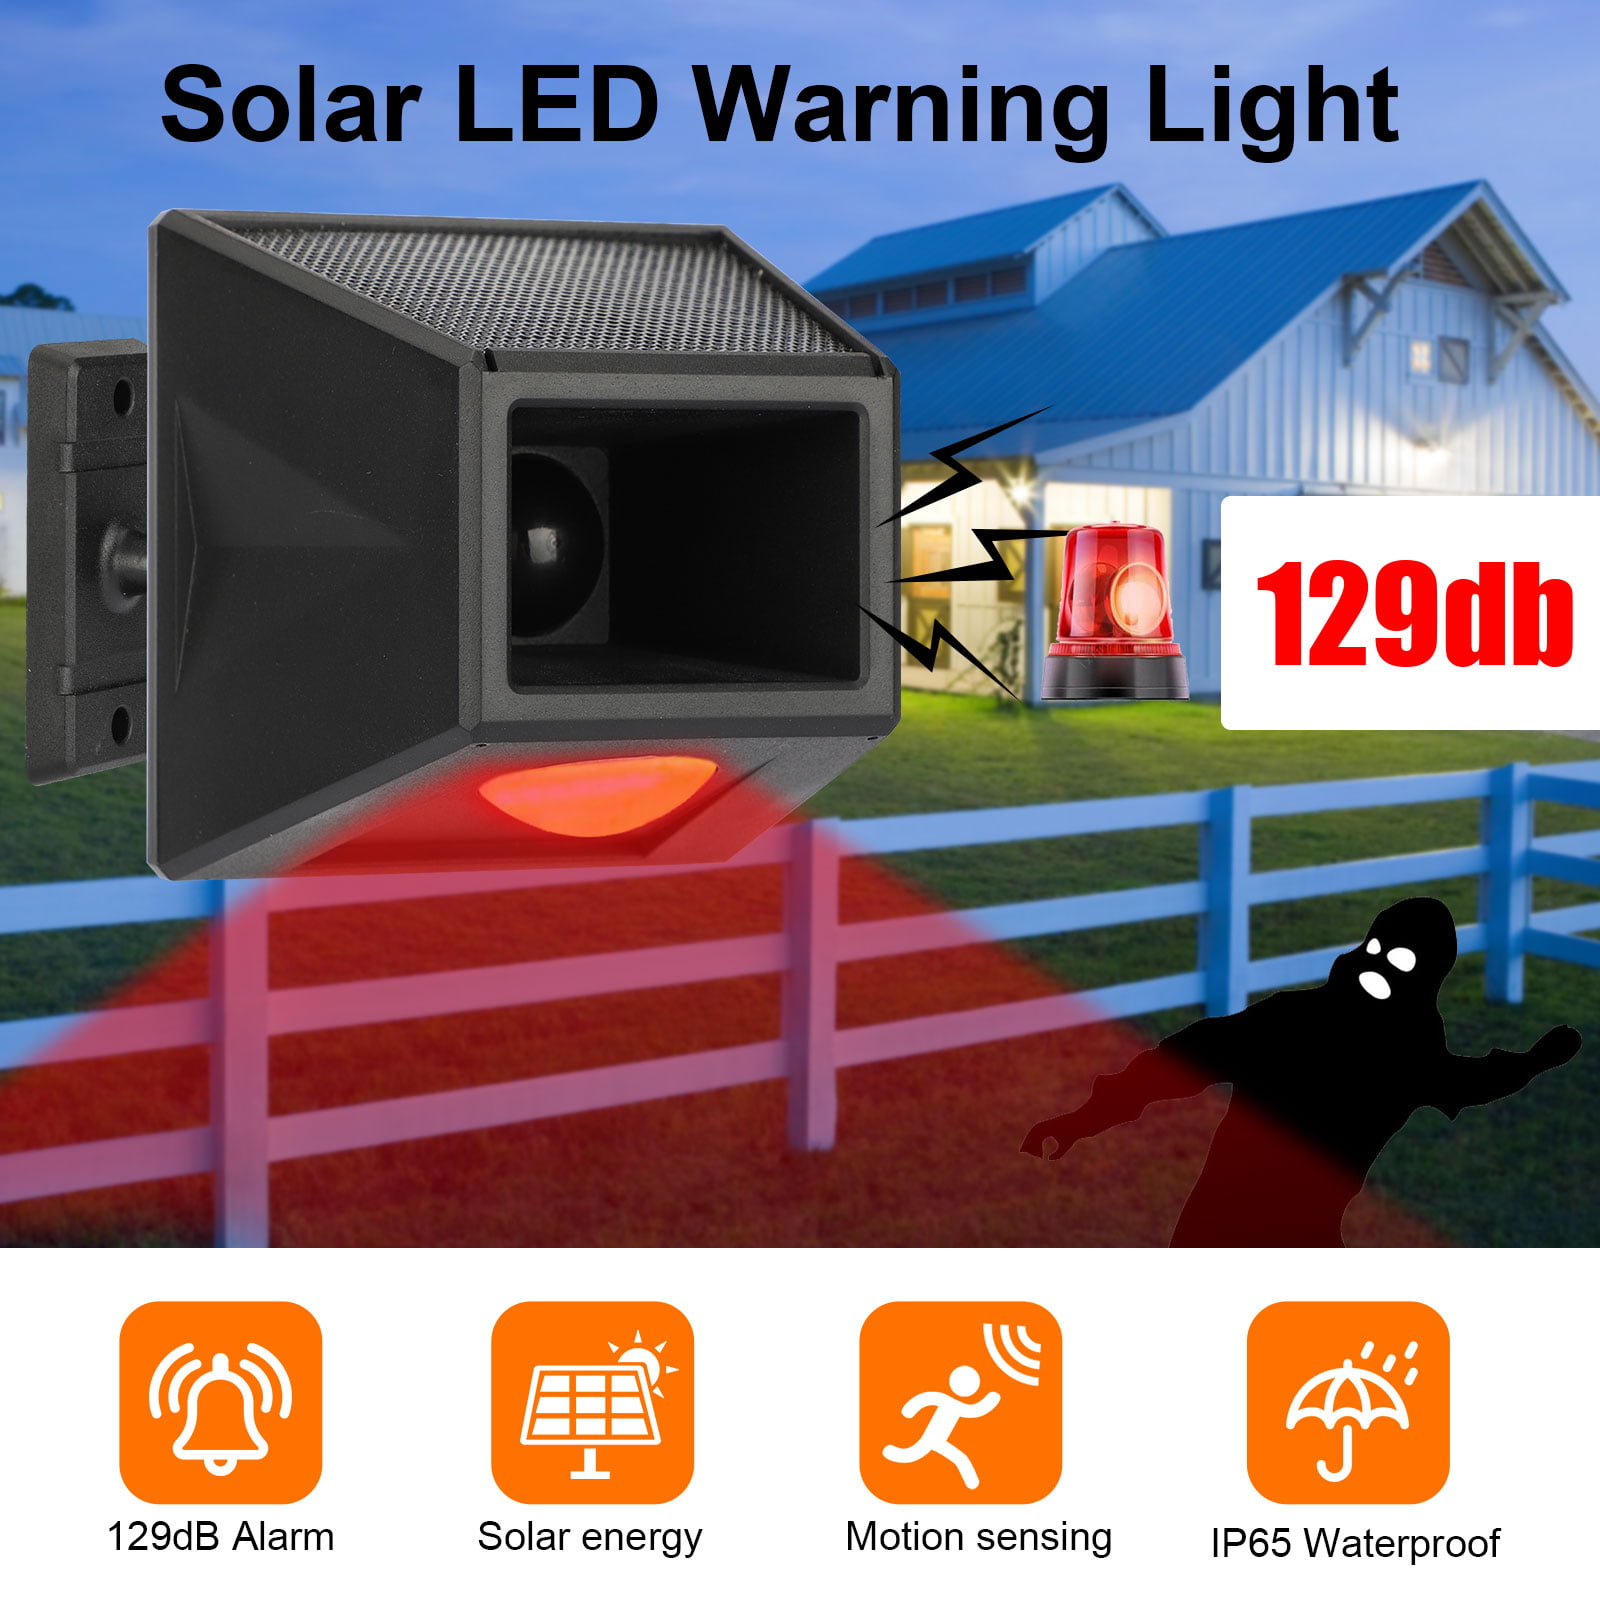 Solar Alarm Light with Motion Sensor,Solar Strobe Light with Motion Detector,129dB Sound Security IP65 Waterproof with Remote Control for Home,Farm,Villa,Yard